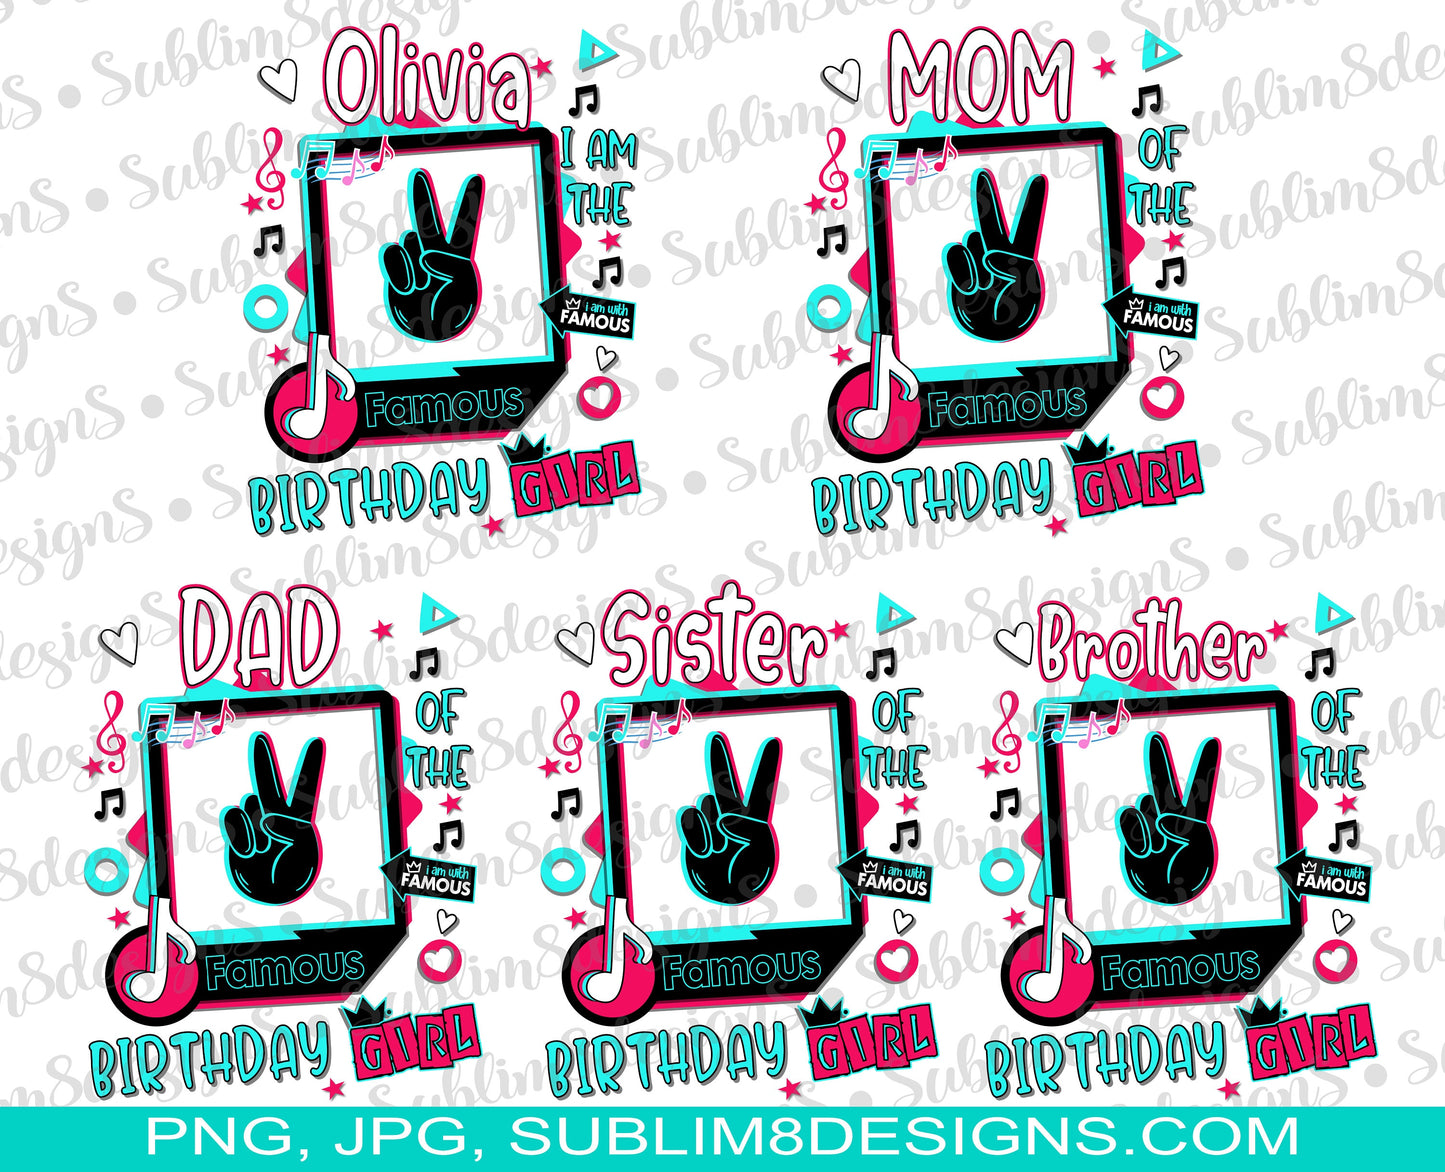 Personalized Famous Birthday Girl, Mom, Dad, Sister, Brother PNG and JPG ONLY